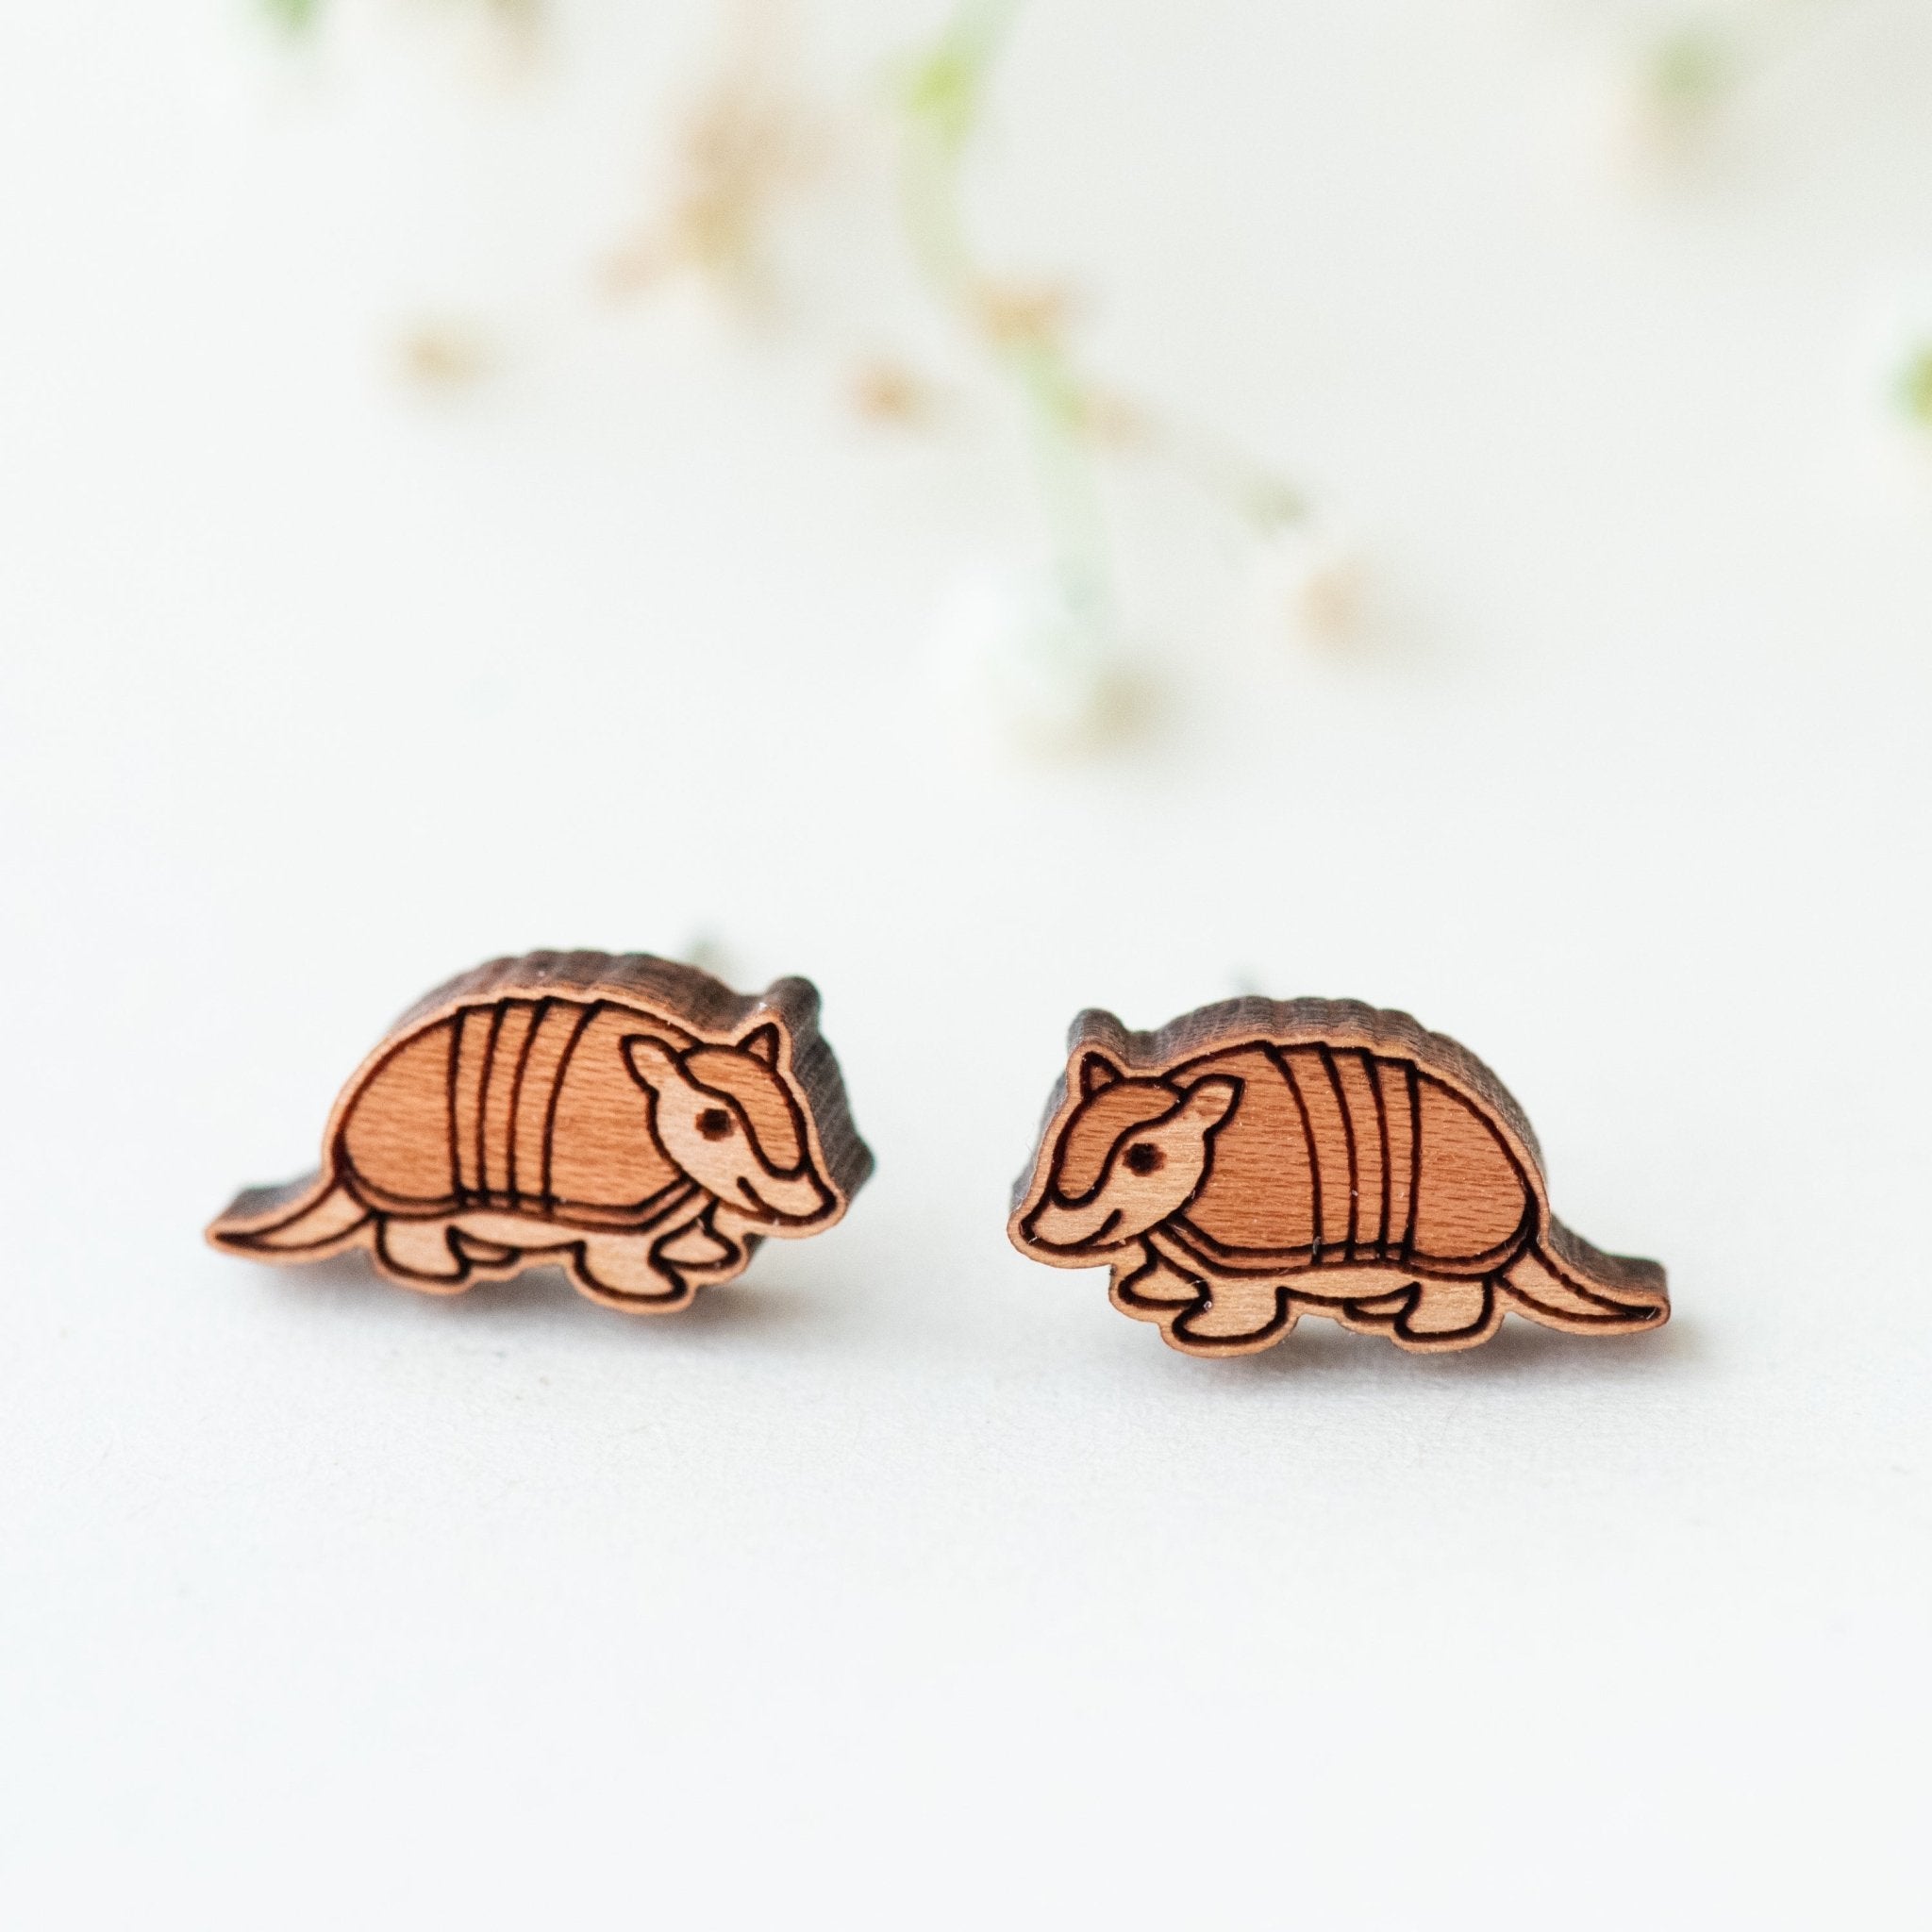 Armadillo Earrings - EL10046 - Robin Valley Official Store